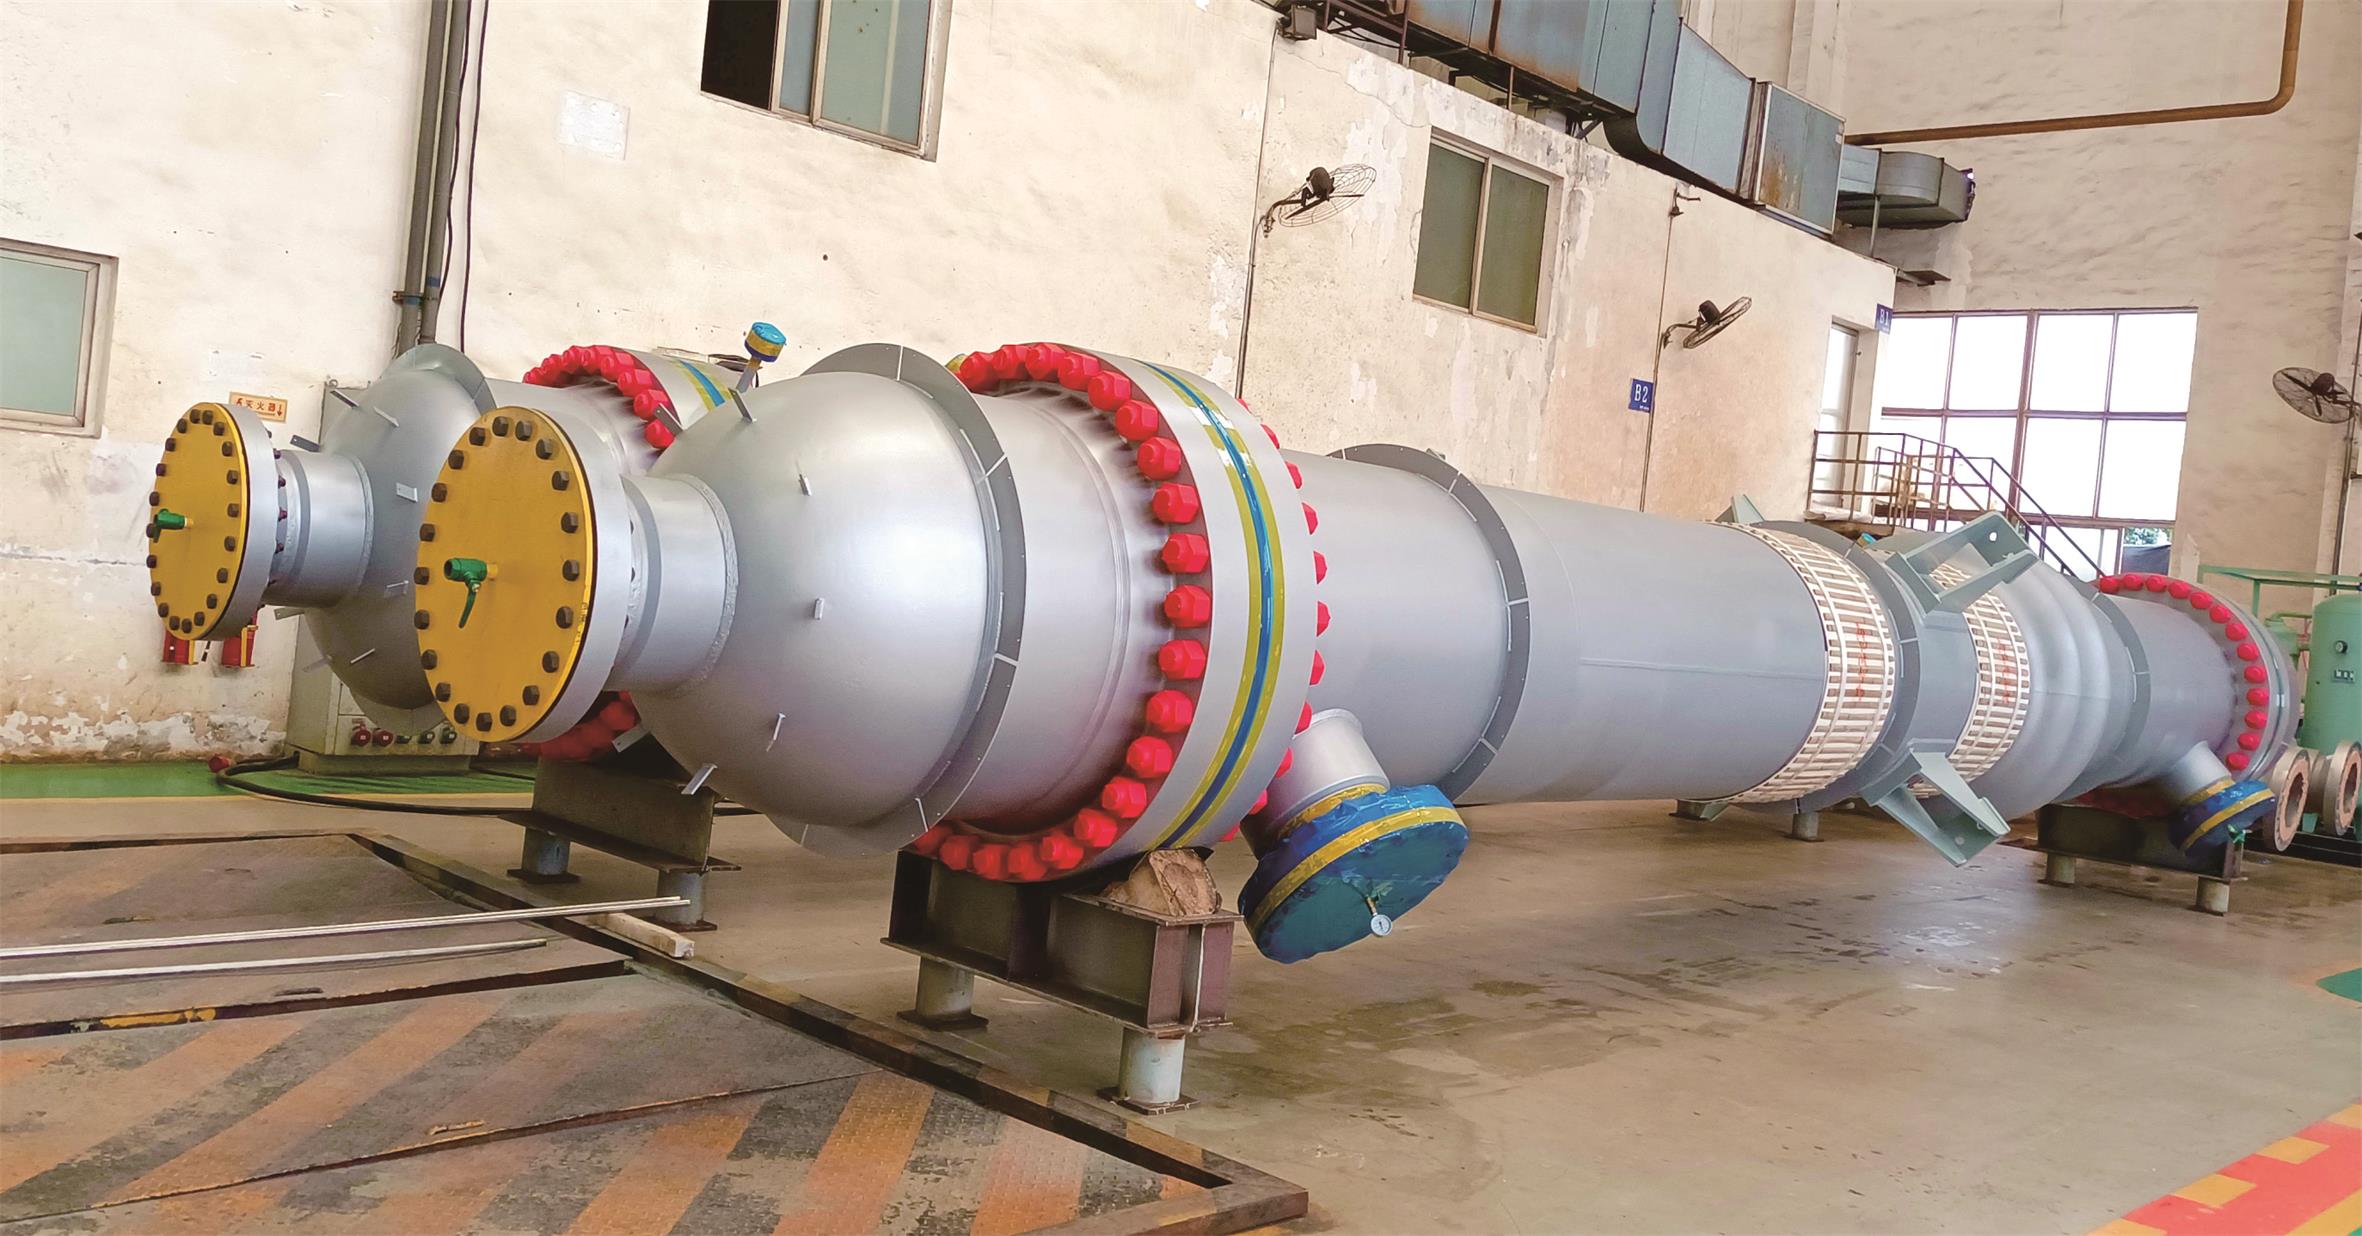 Primary Heat Exchanger at Reactor Outlet（Nickel Alloy）